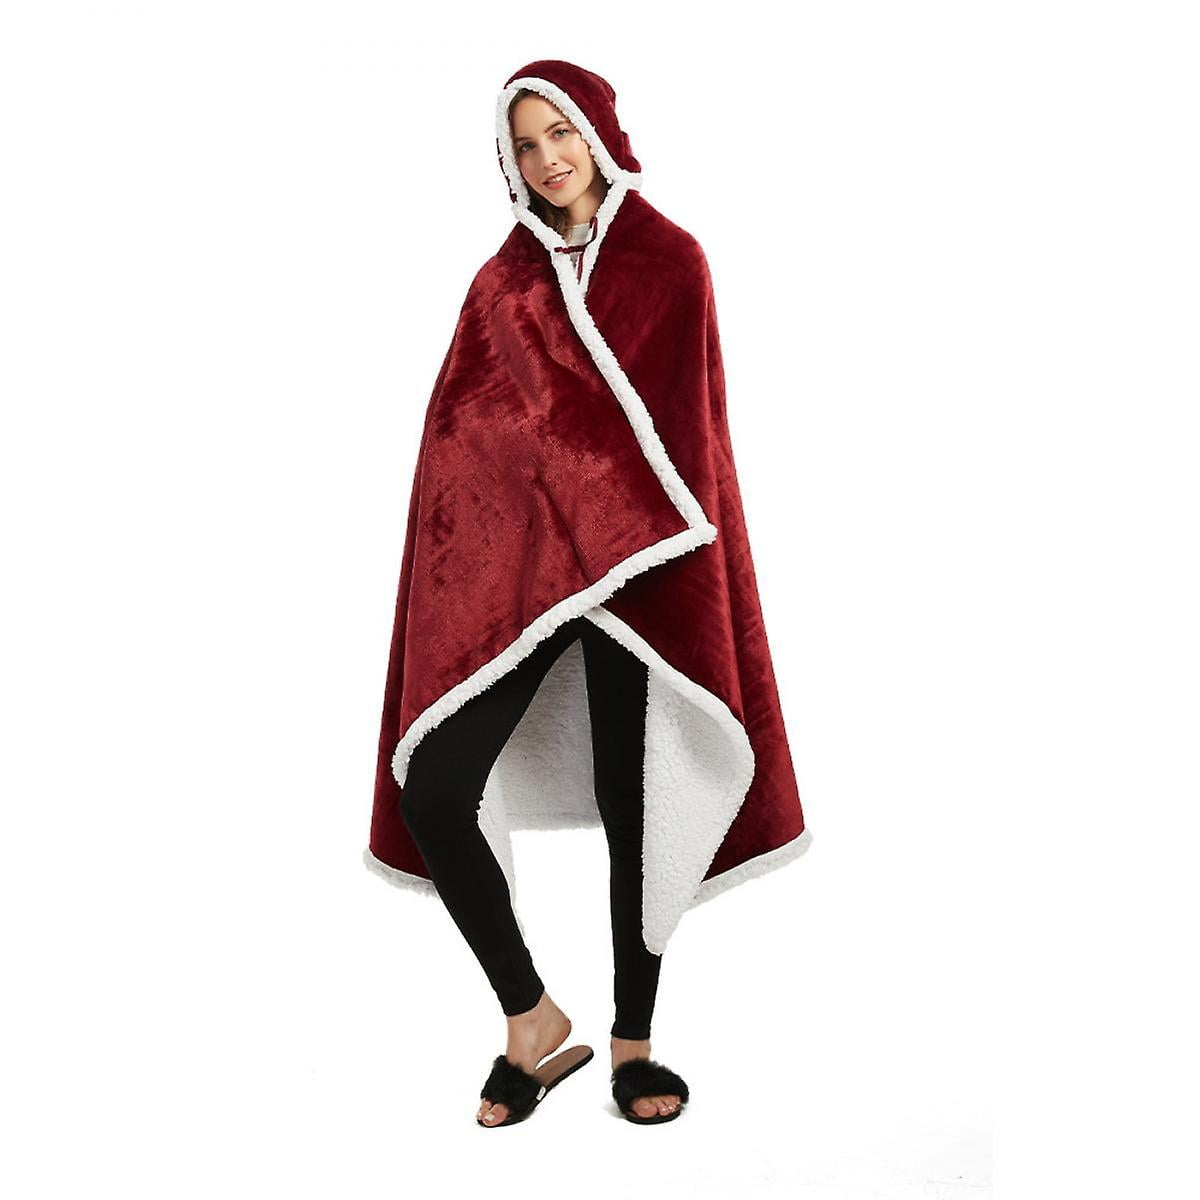 Shxx Angel Wrap Hooded Blanket | Poncho Blanket Wrap With Soft Fleece |  Wearable Blanket Throw Gift With Hood Pockets Cape A1014-338